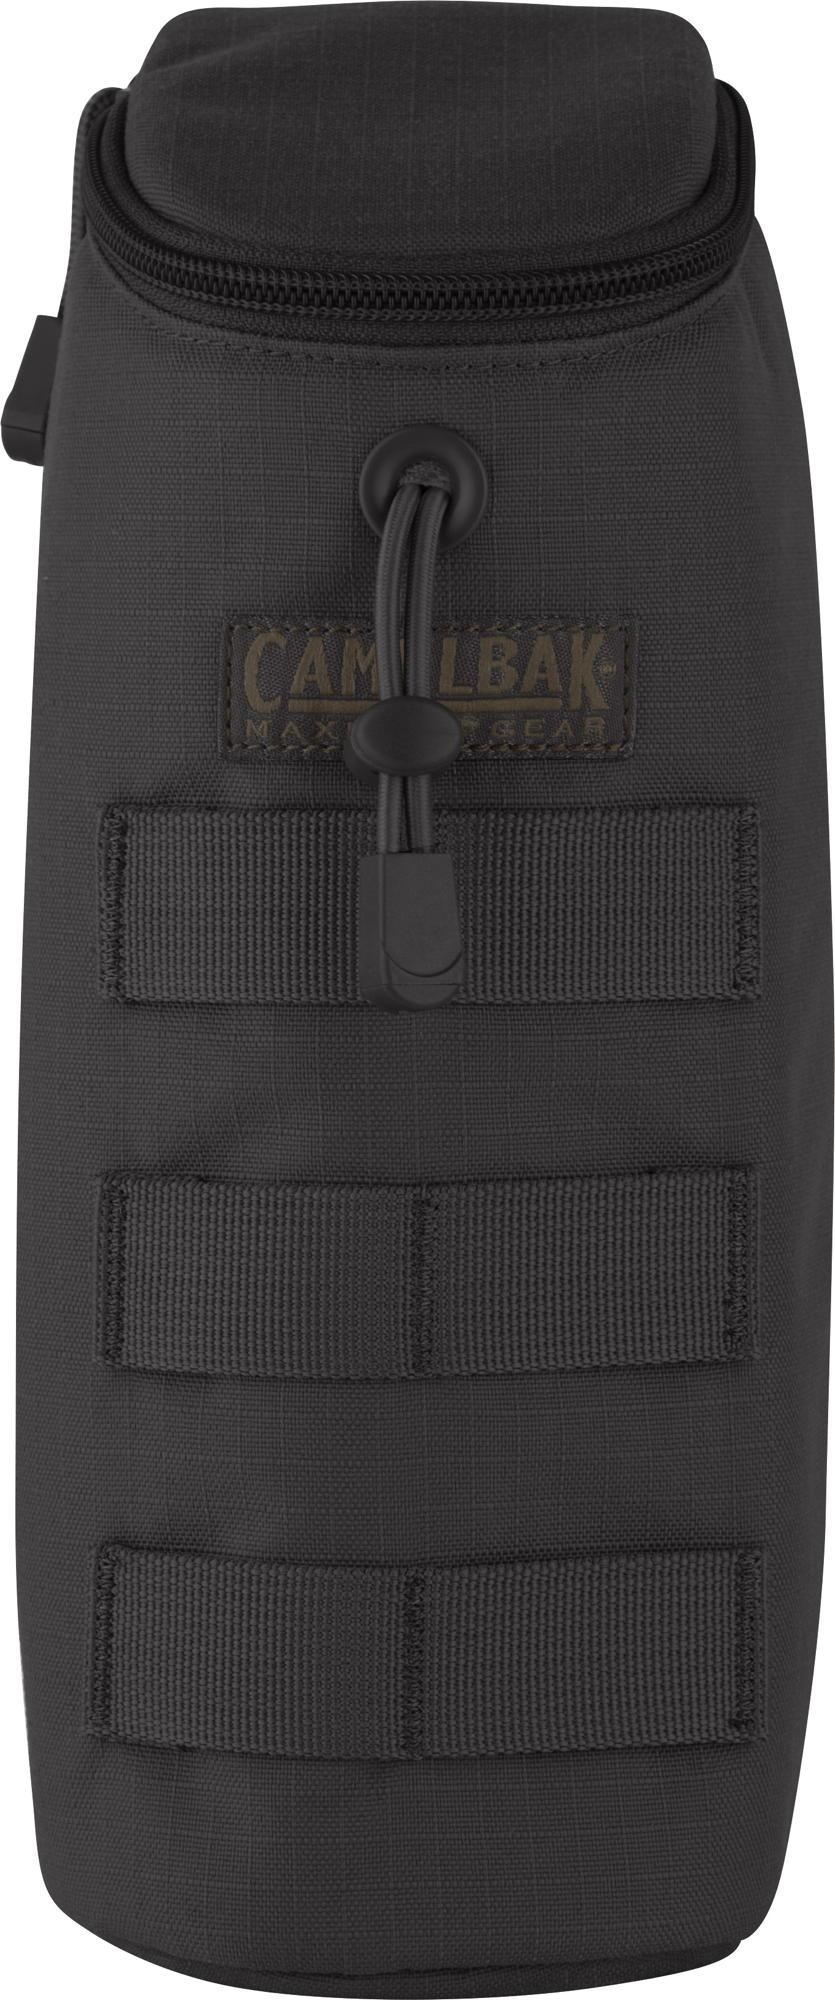 Gear - Pouches - Hydration - Camelbak Max Gear MOLLE Water Bottle Pouch